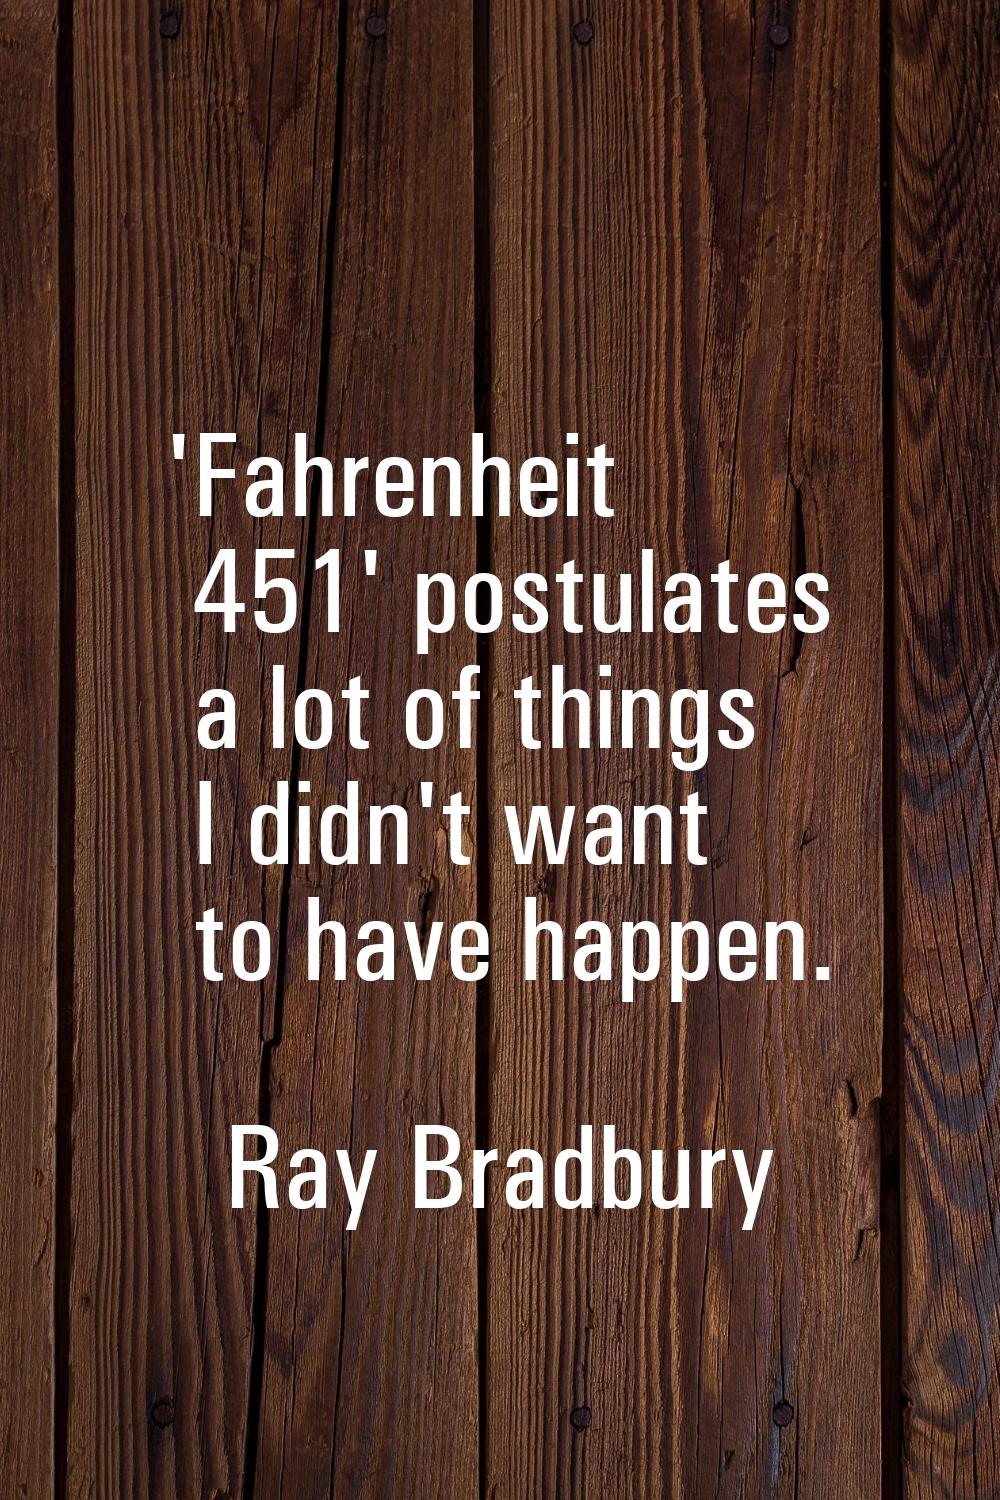 'Fahrenheit 451' postulates a lot of things I didn't want to have happen.